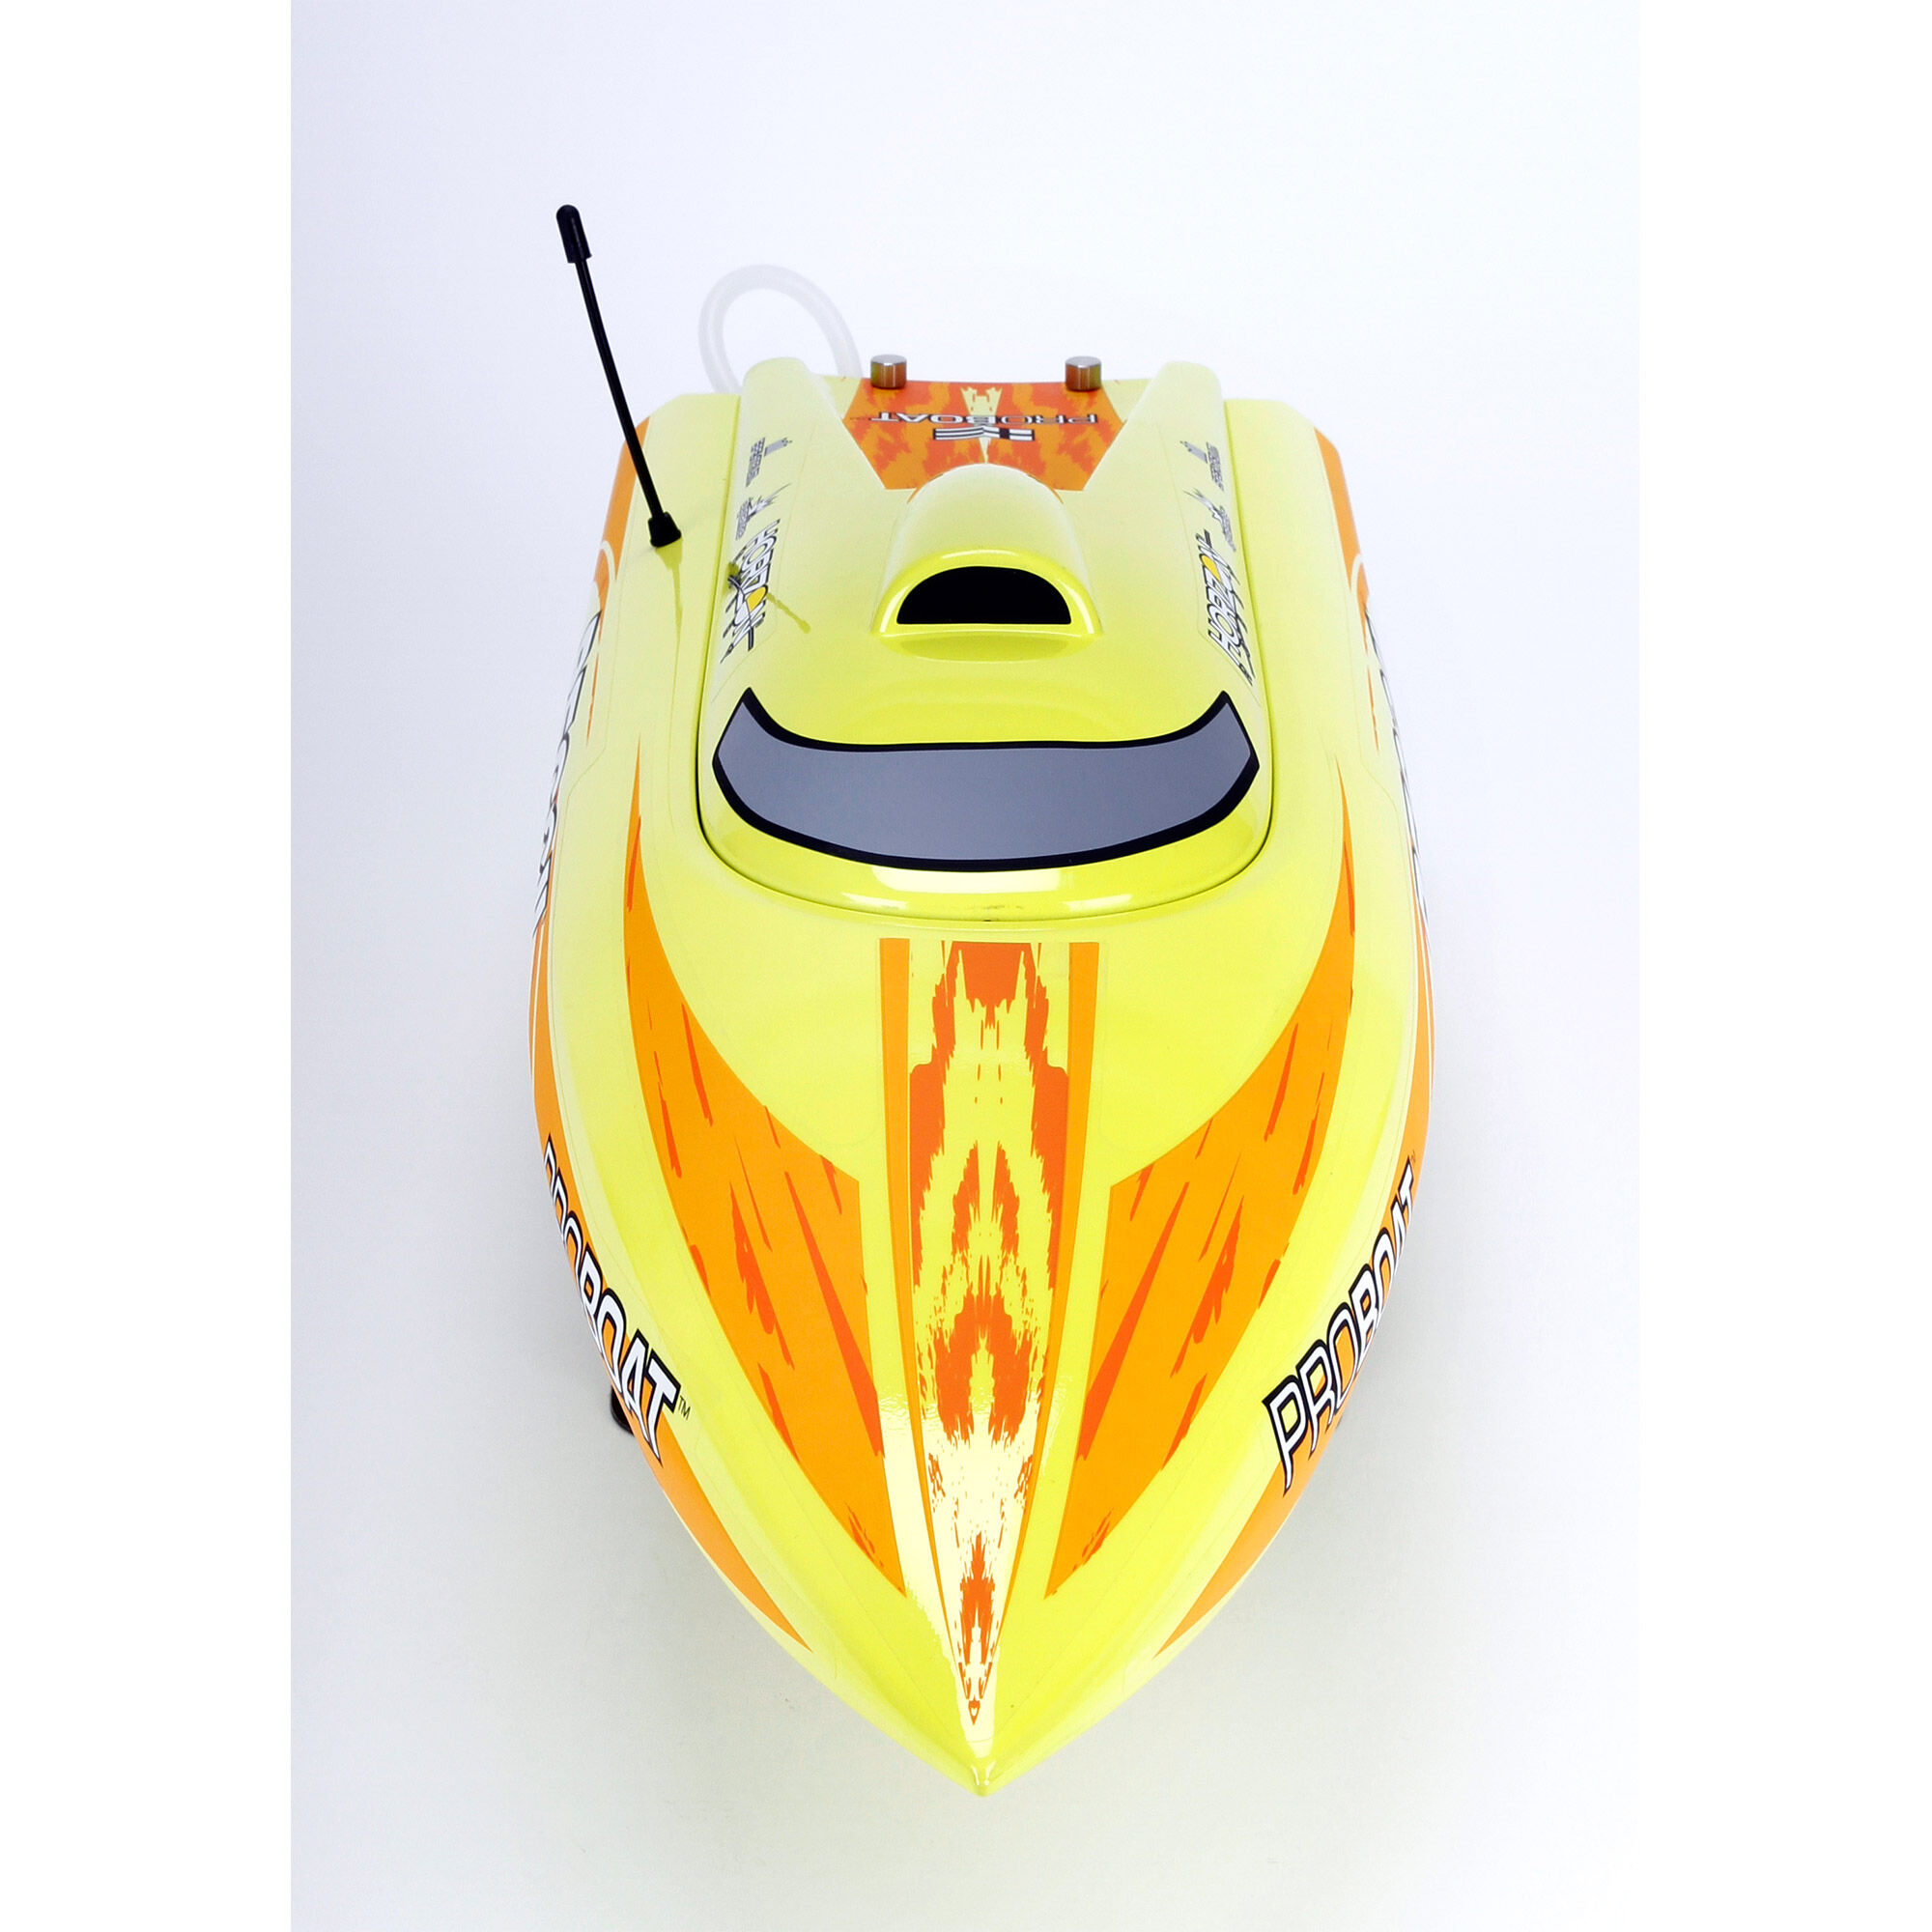 recoil 26 rc boat